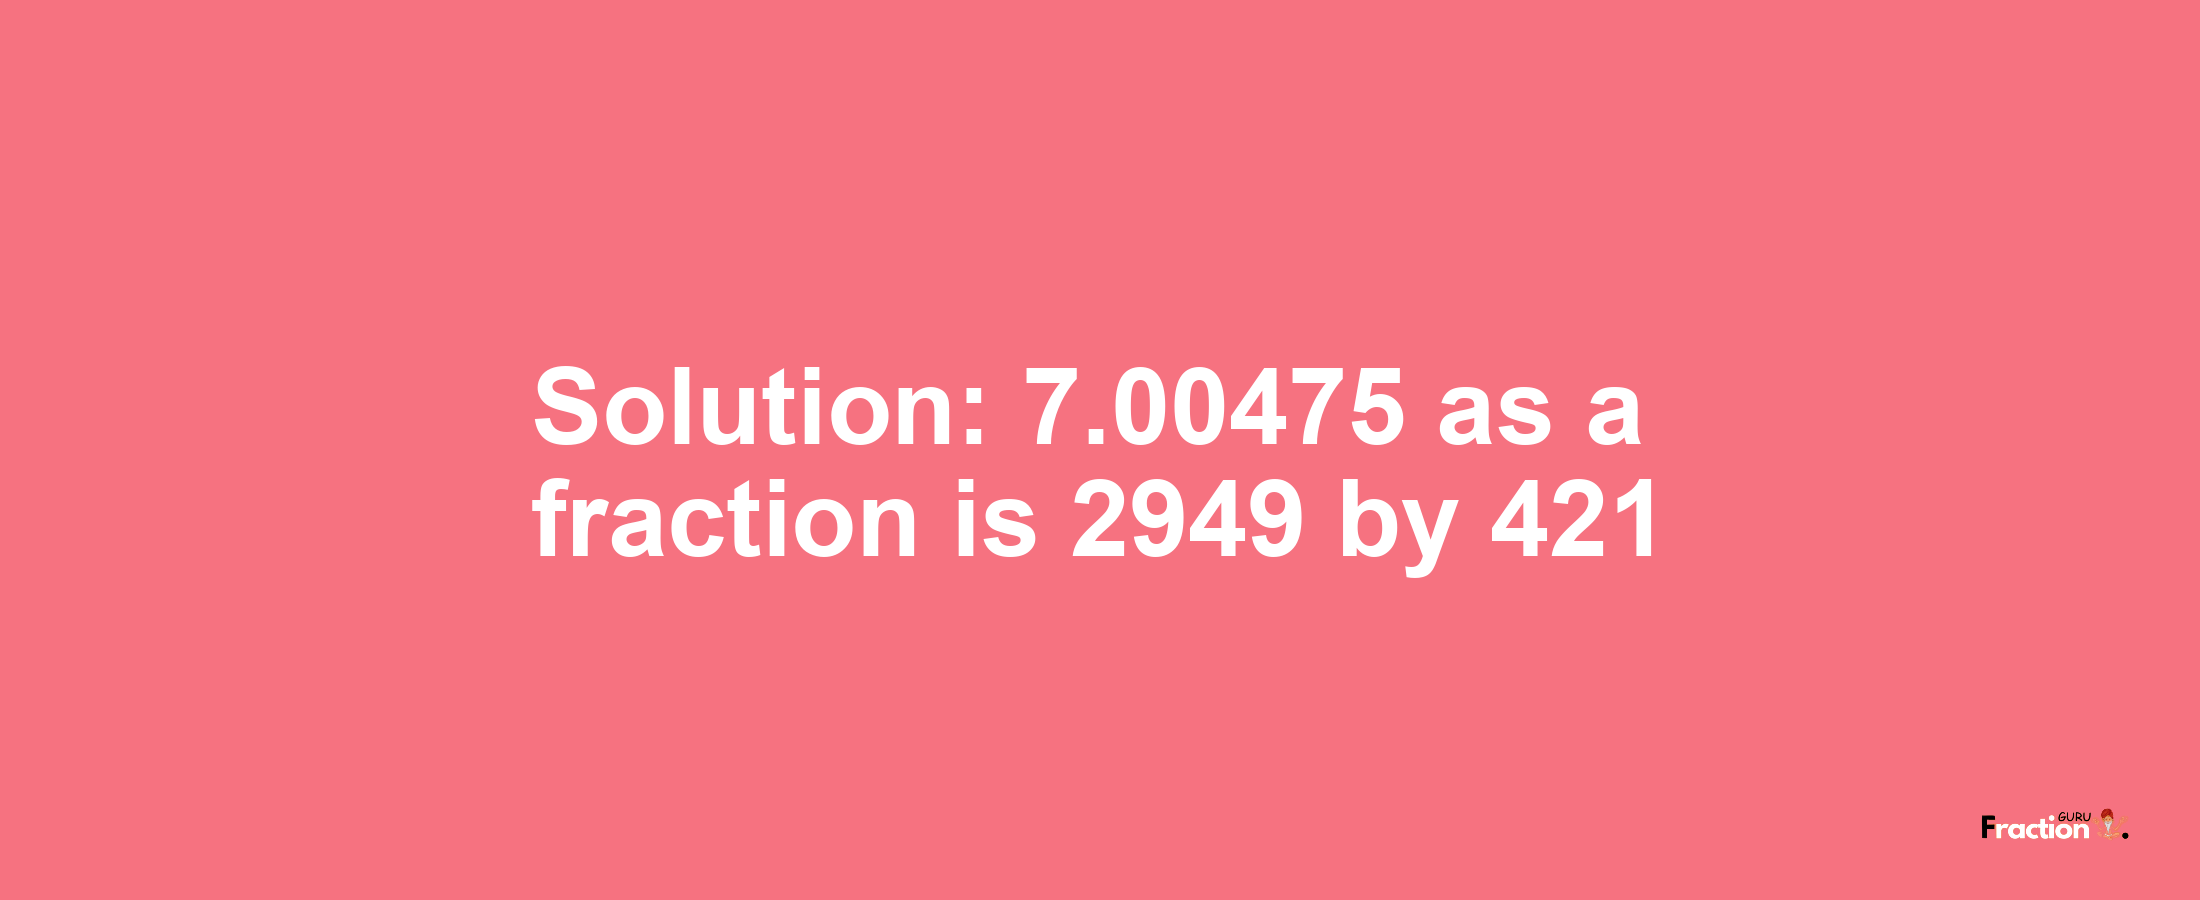 Solution:7.00475 as a fraction is 2949/421